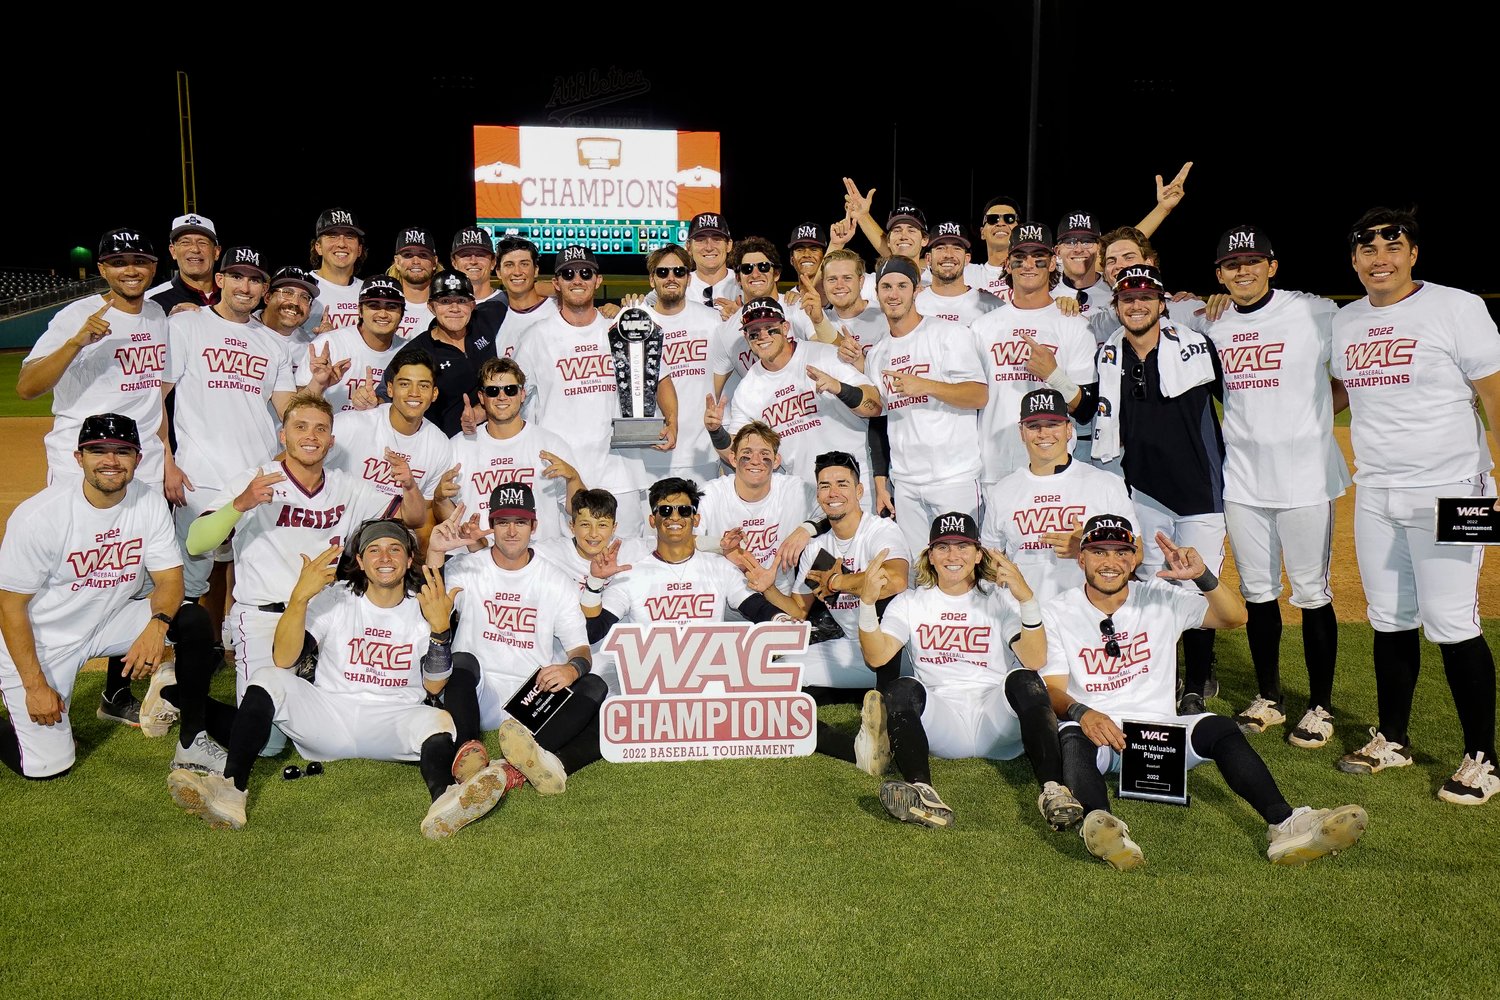 NMSU baseball won the WAC tournament after having to win two of its last three regular season games just to qualify as the fourth and final team from its division.